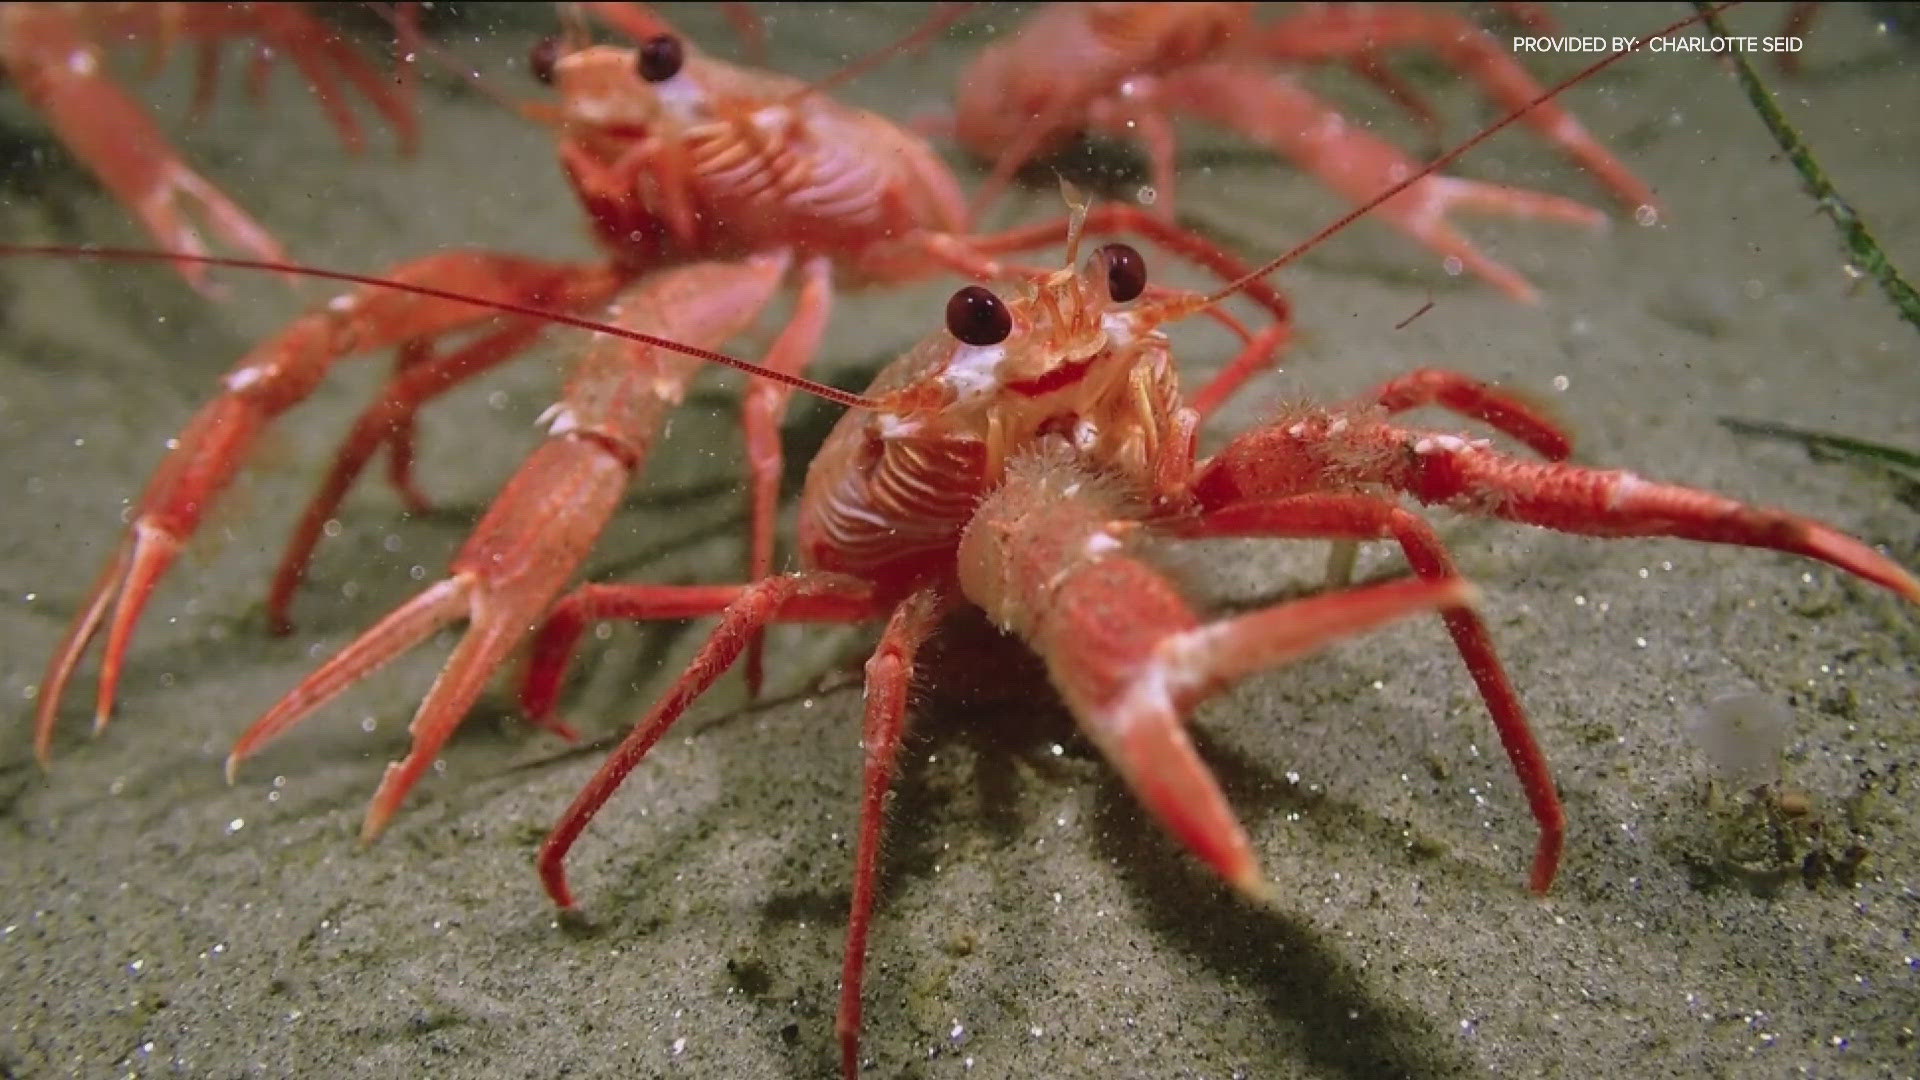 Although tuna crabs have been consistently found near the California coast since the 1950s, it's rare to see them at scuba-diving depths so close to the shore.